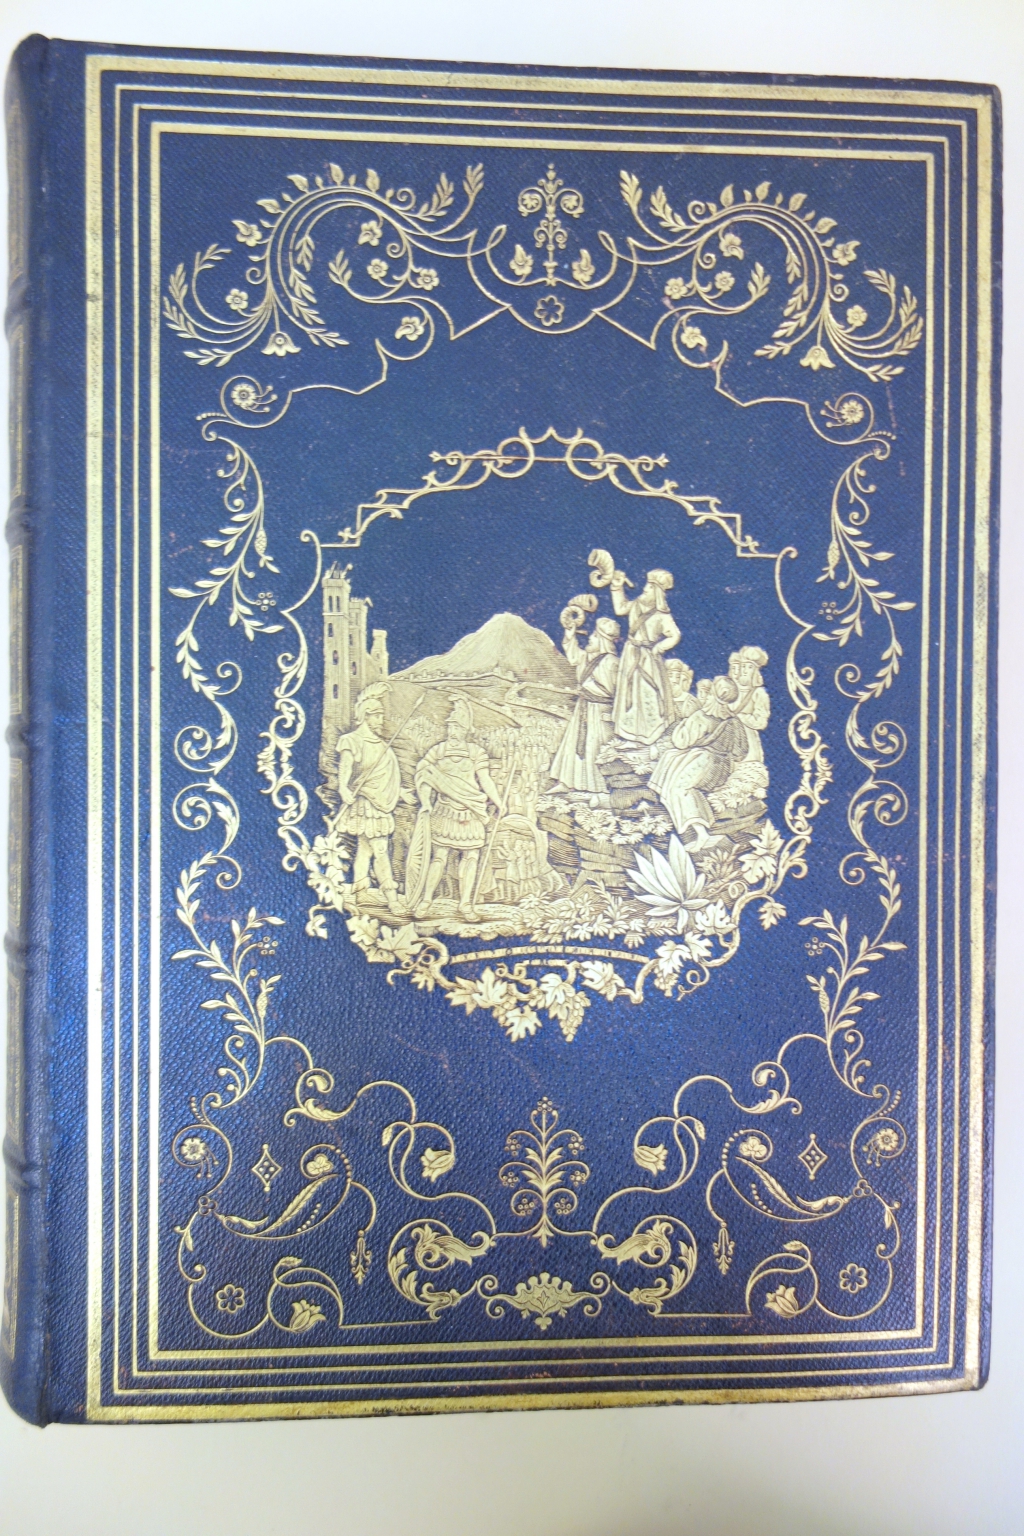 One of the more elaborate American bindings of the period done for this large volume.